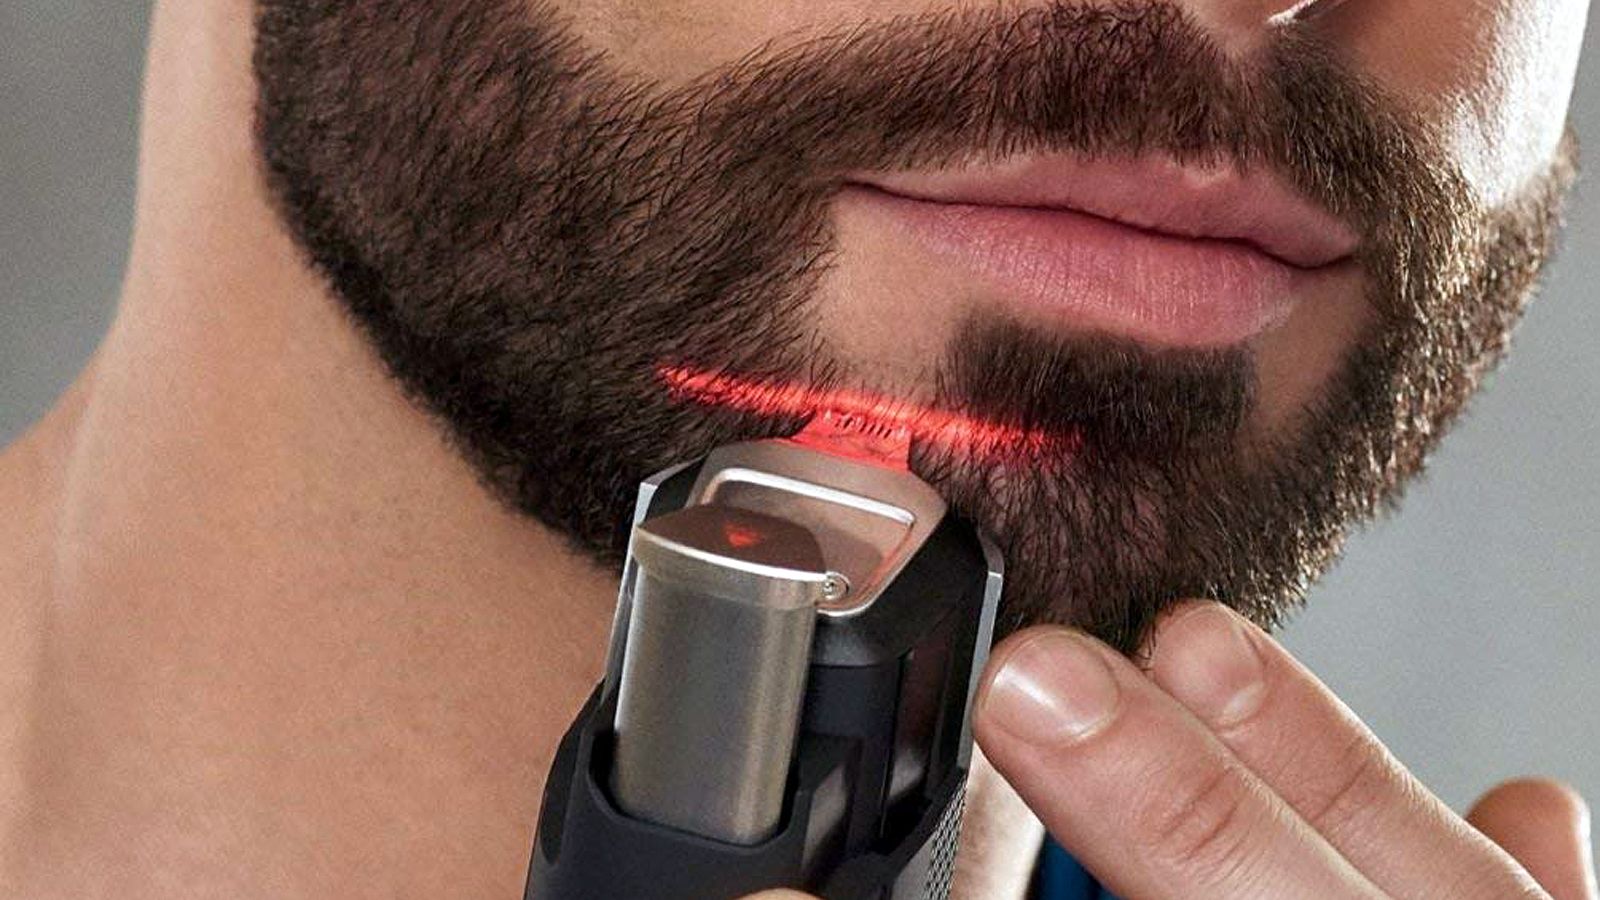 philips series 9000 beard trimmer review